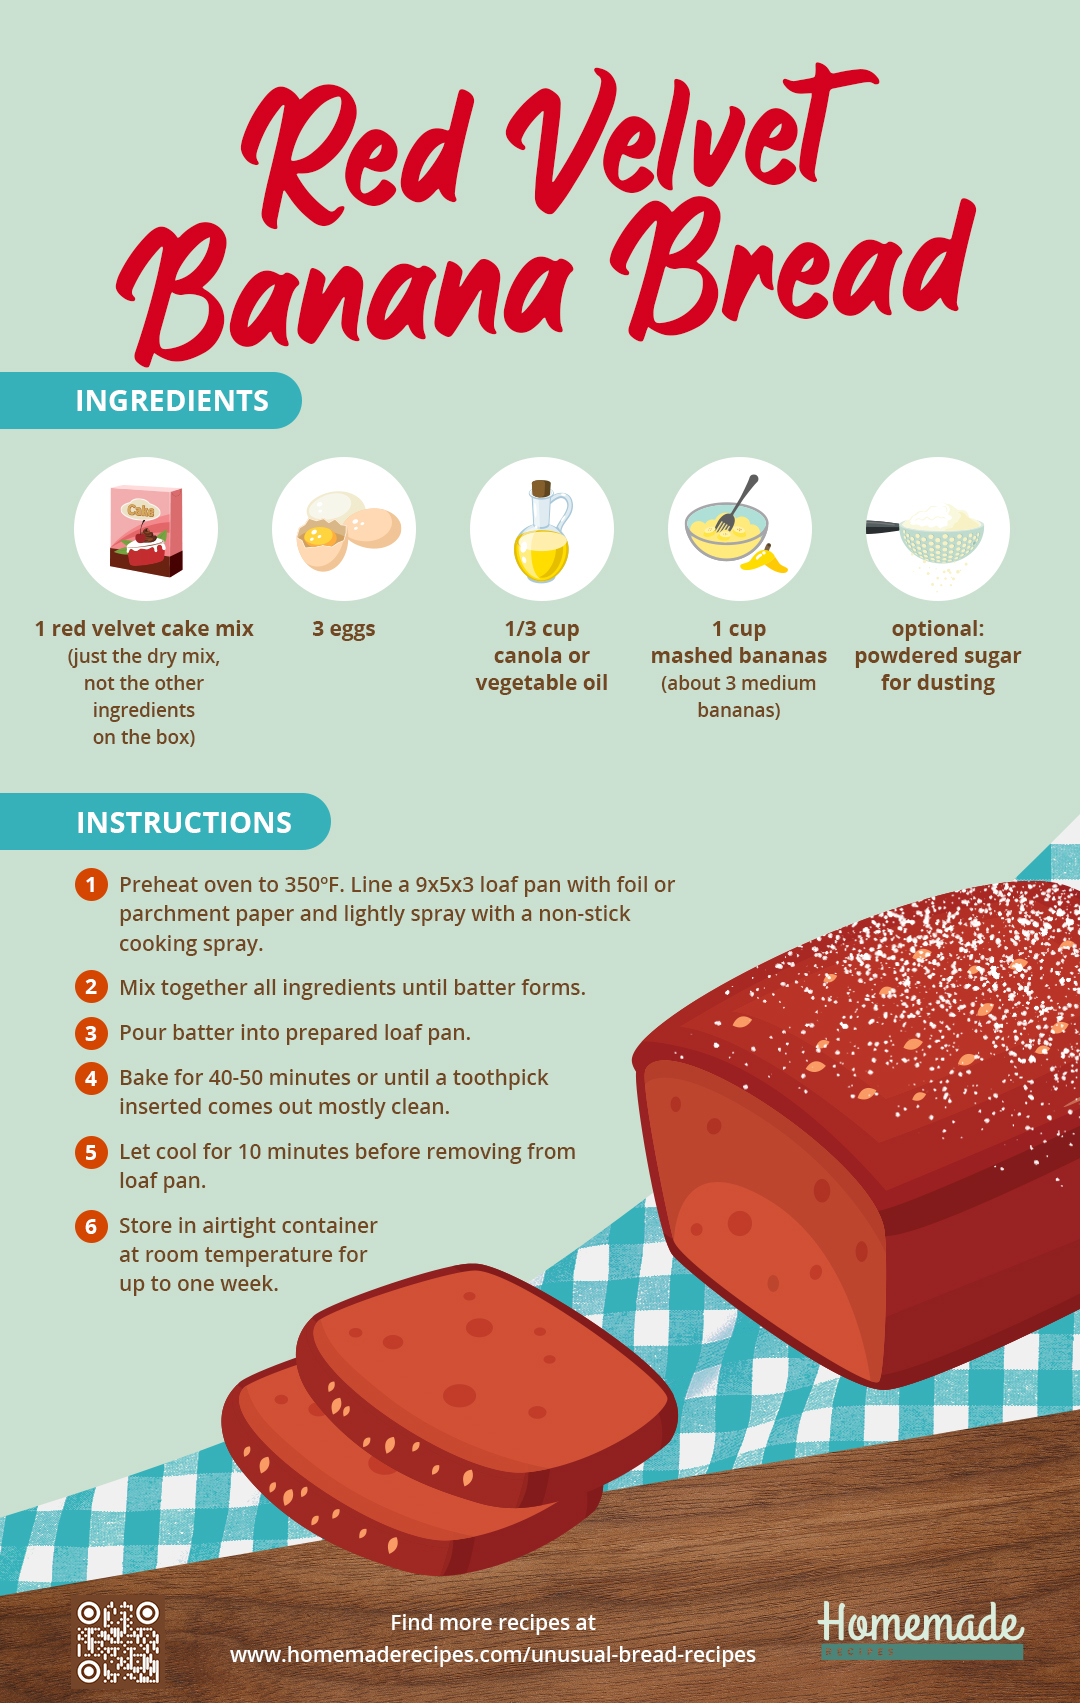 Red Velvet Banana Bread | Unusual Bread Recipes You Have To Try [INFOGRAPHIC]